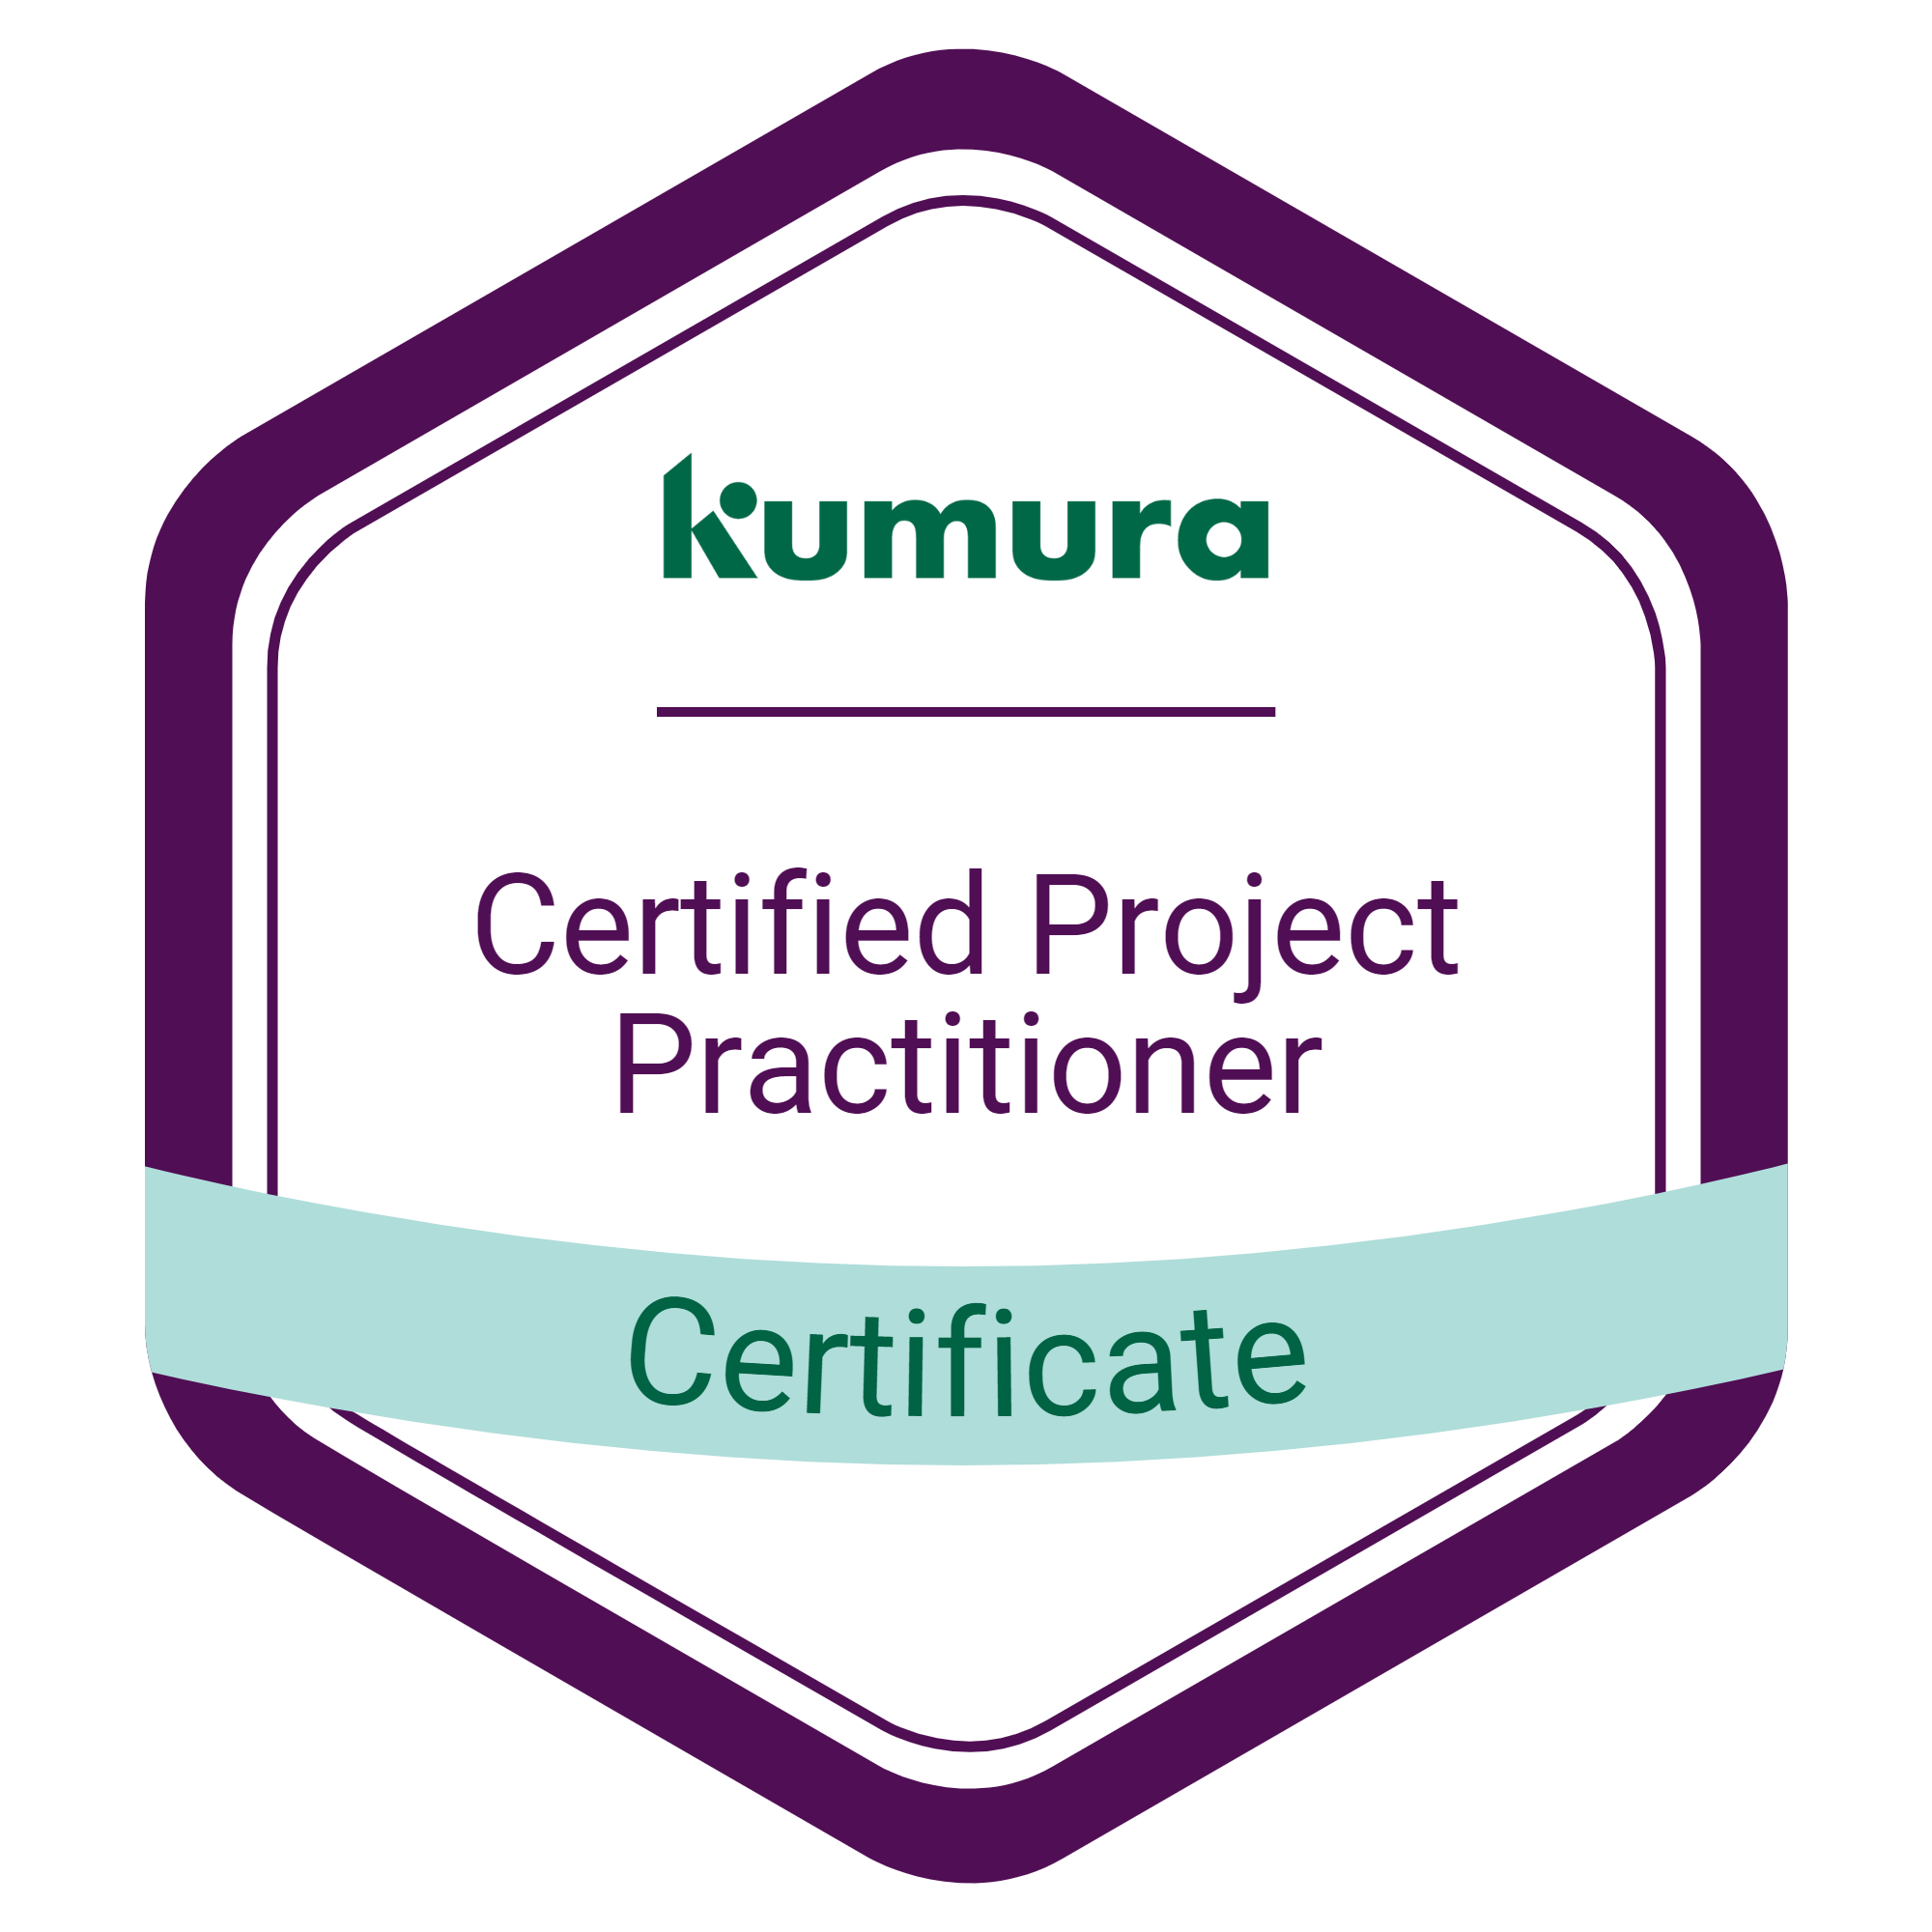 certified-project-practitioner.png (208 KB)